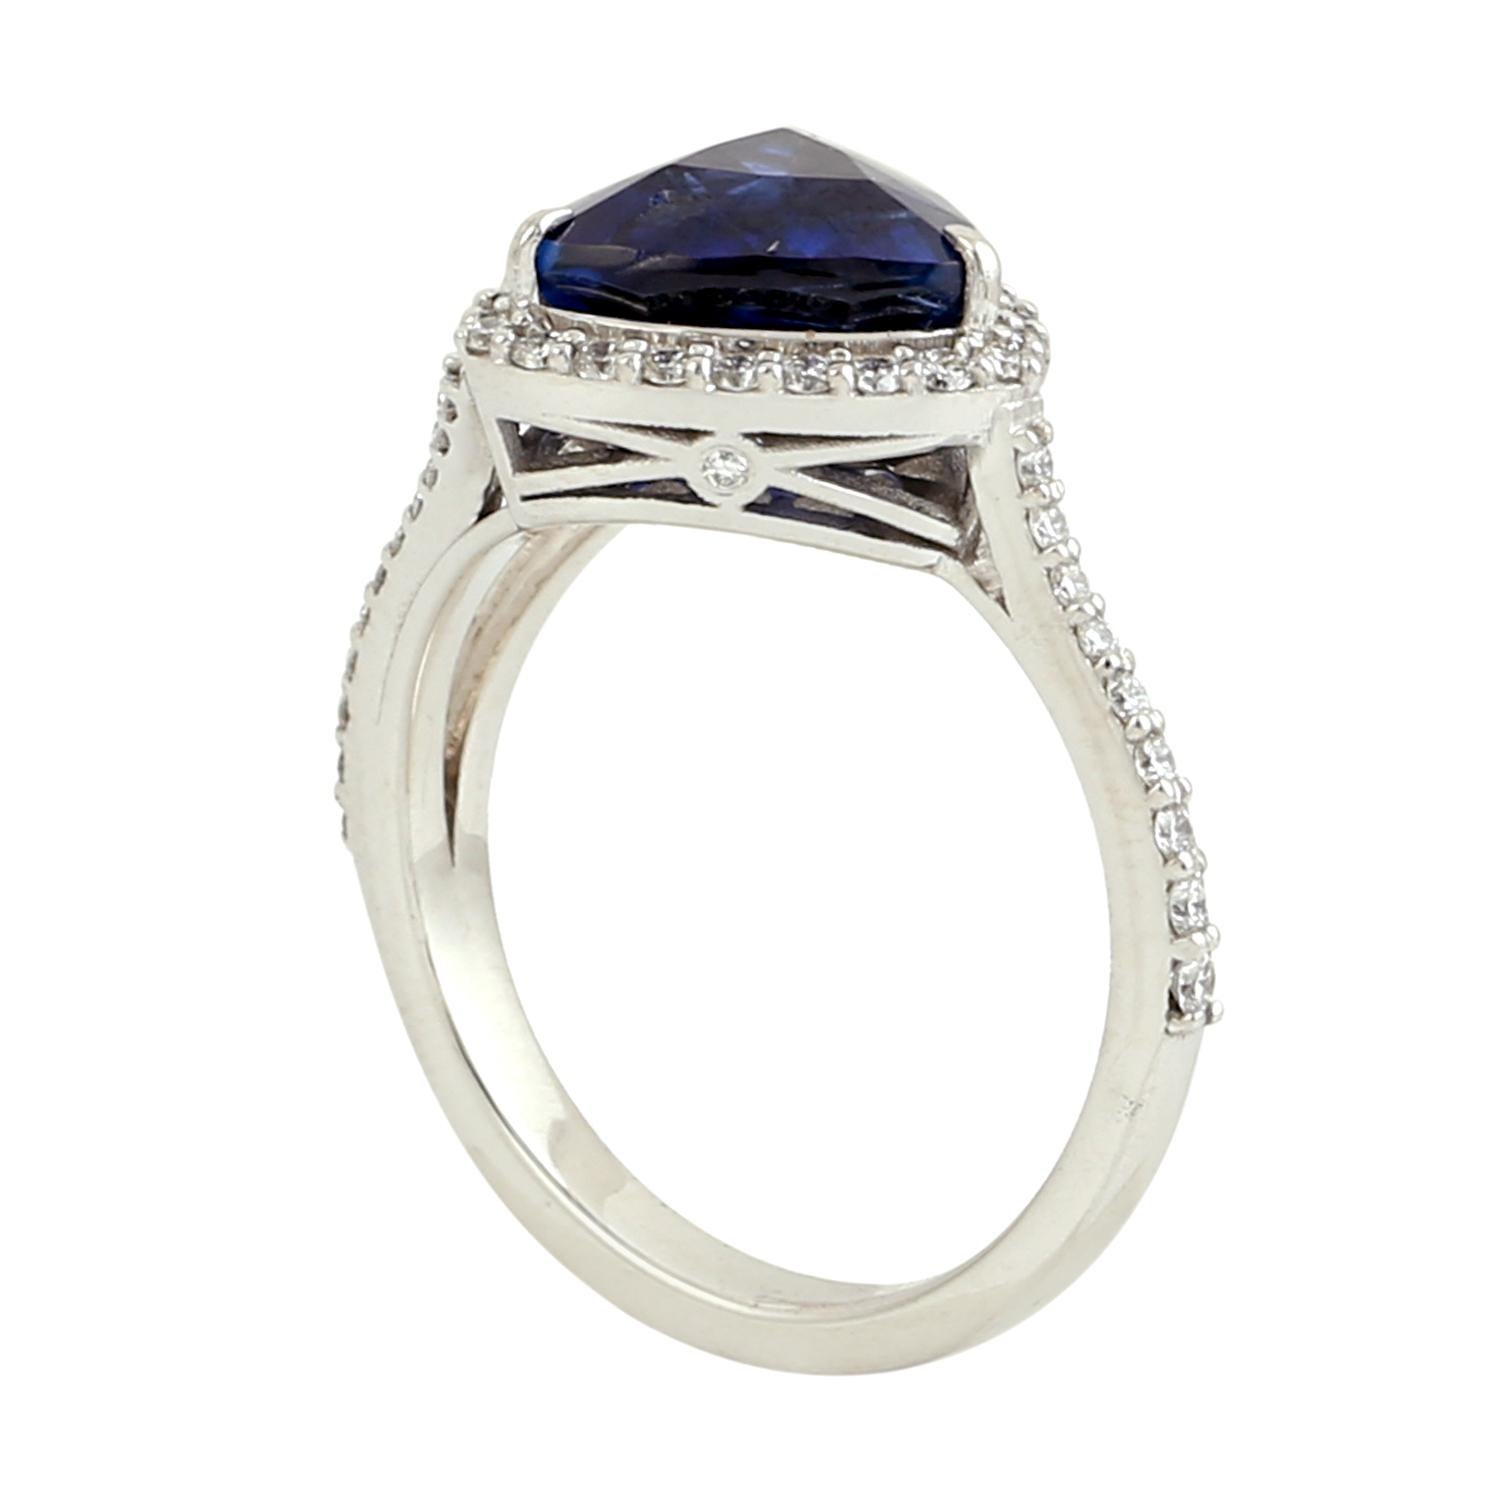 Mixed Cut Blue Sapphire Cocktail Ring With Diamonds Made in 18k White Gold For Sale